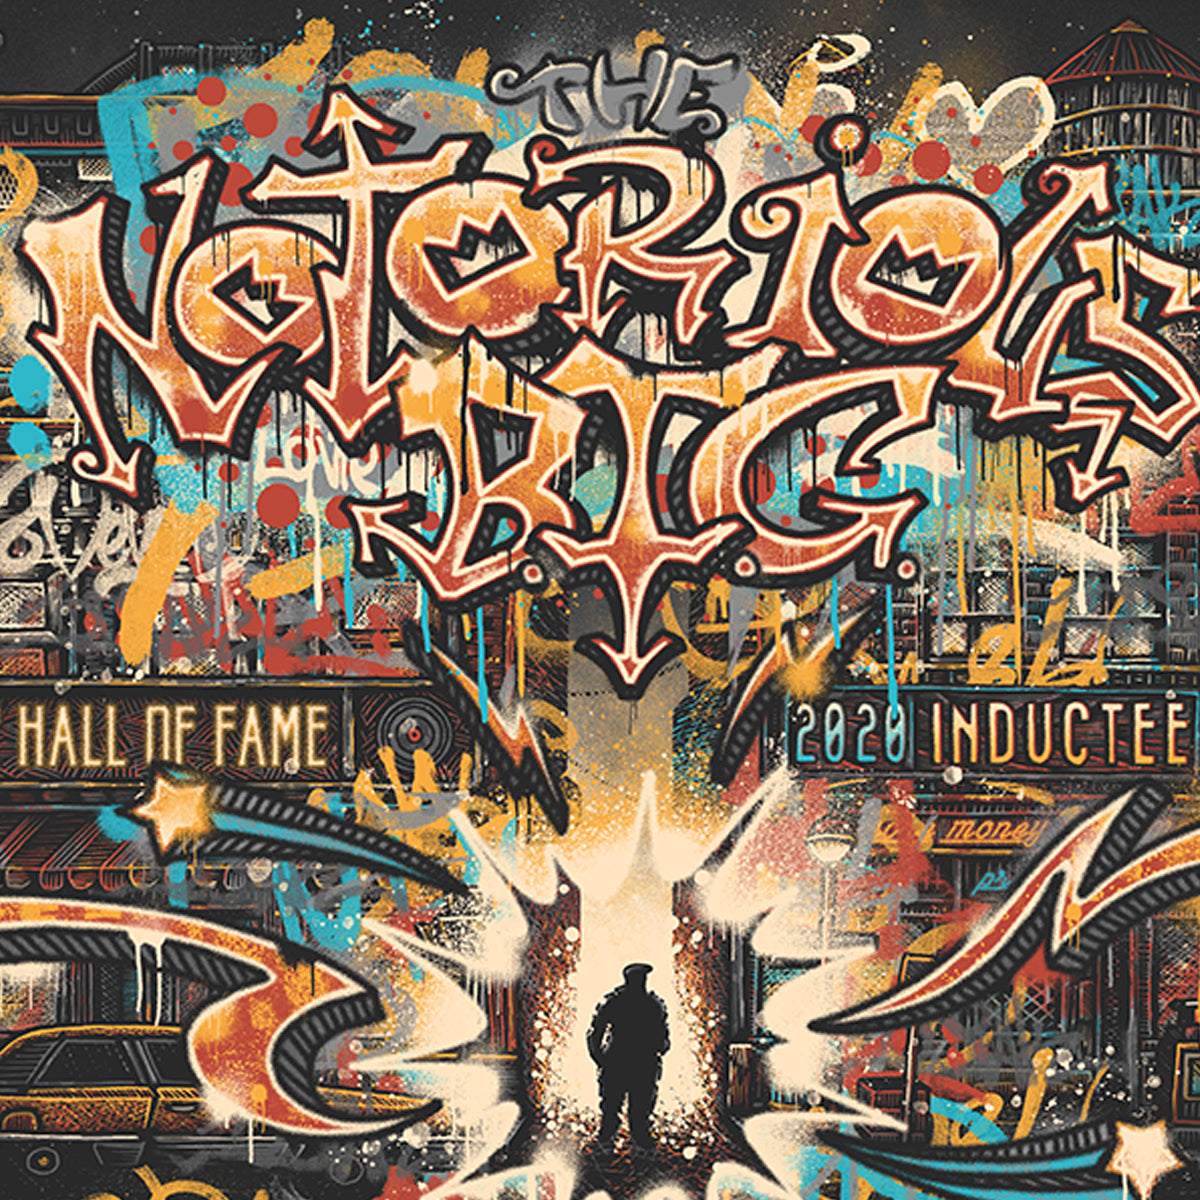 The Notorious B.I.G. Hall of Fame by Luke Martin (Main Edition)